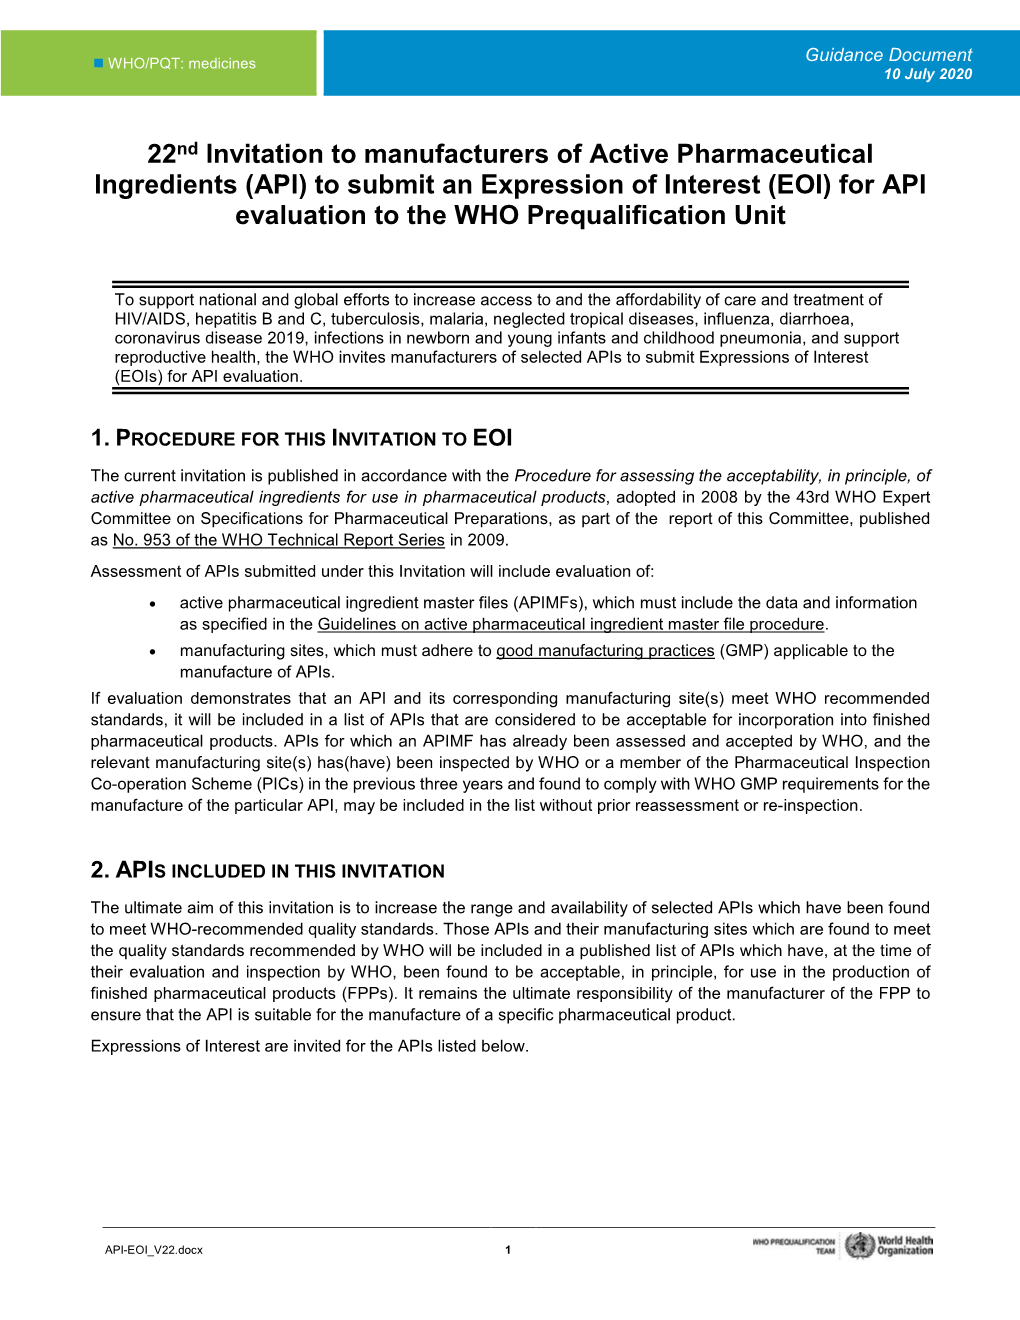 (API) to Submit an Expression of Interest (EOI) for API Evaluation to the WHO Prequalification Unit